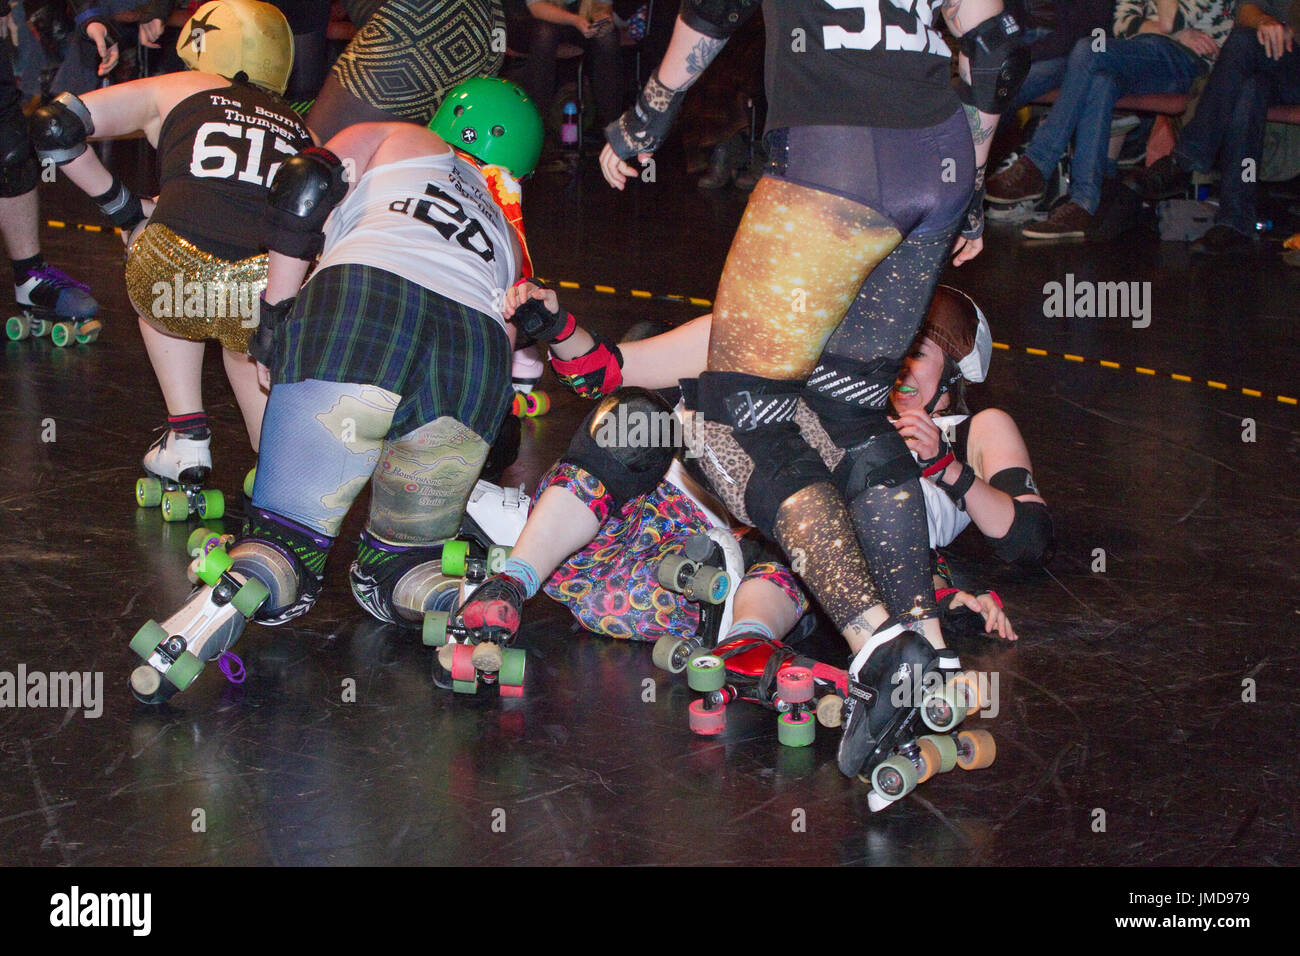 Pile up during a roller derby bout Stock Photo - Alamy